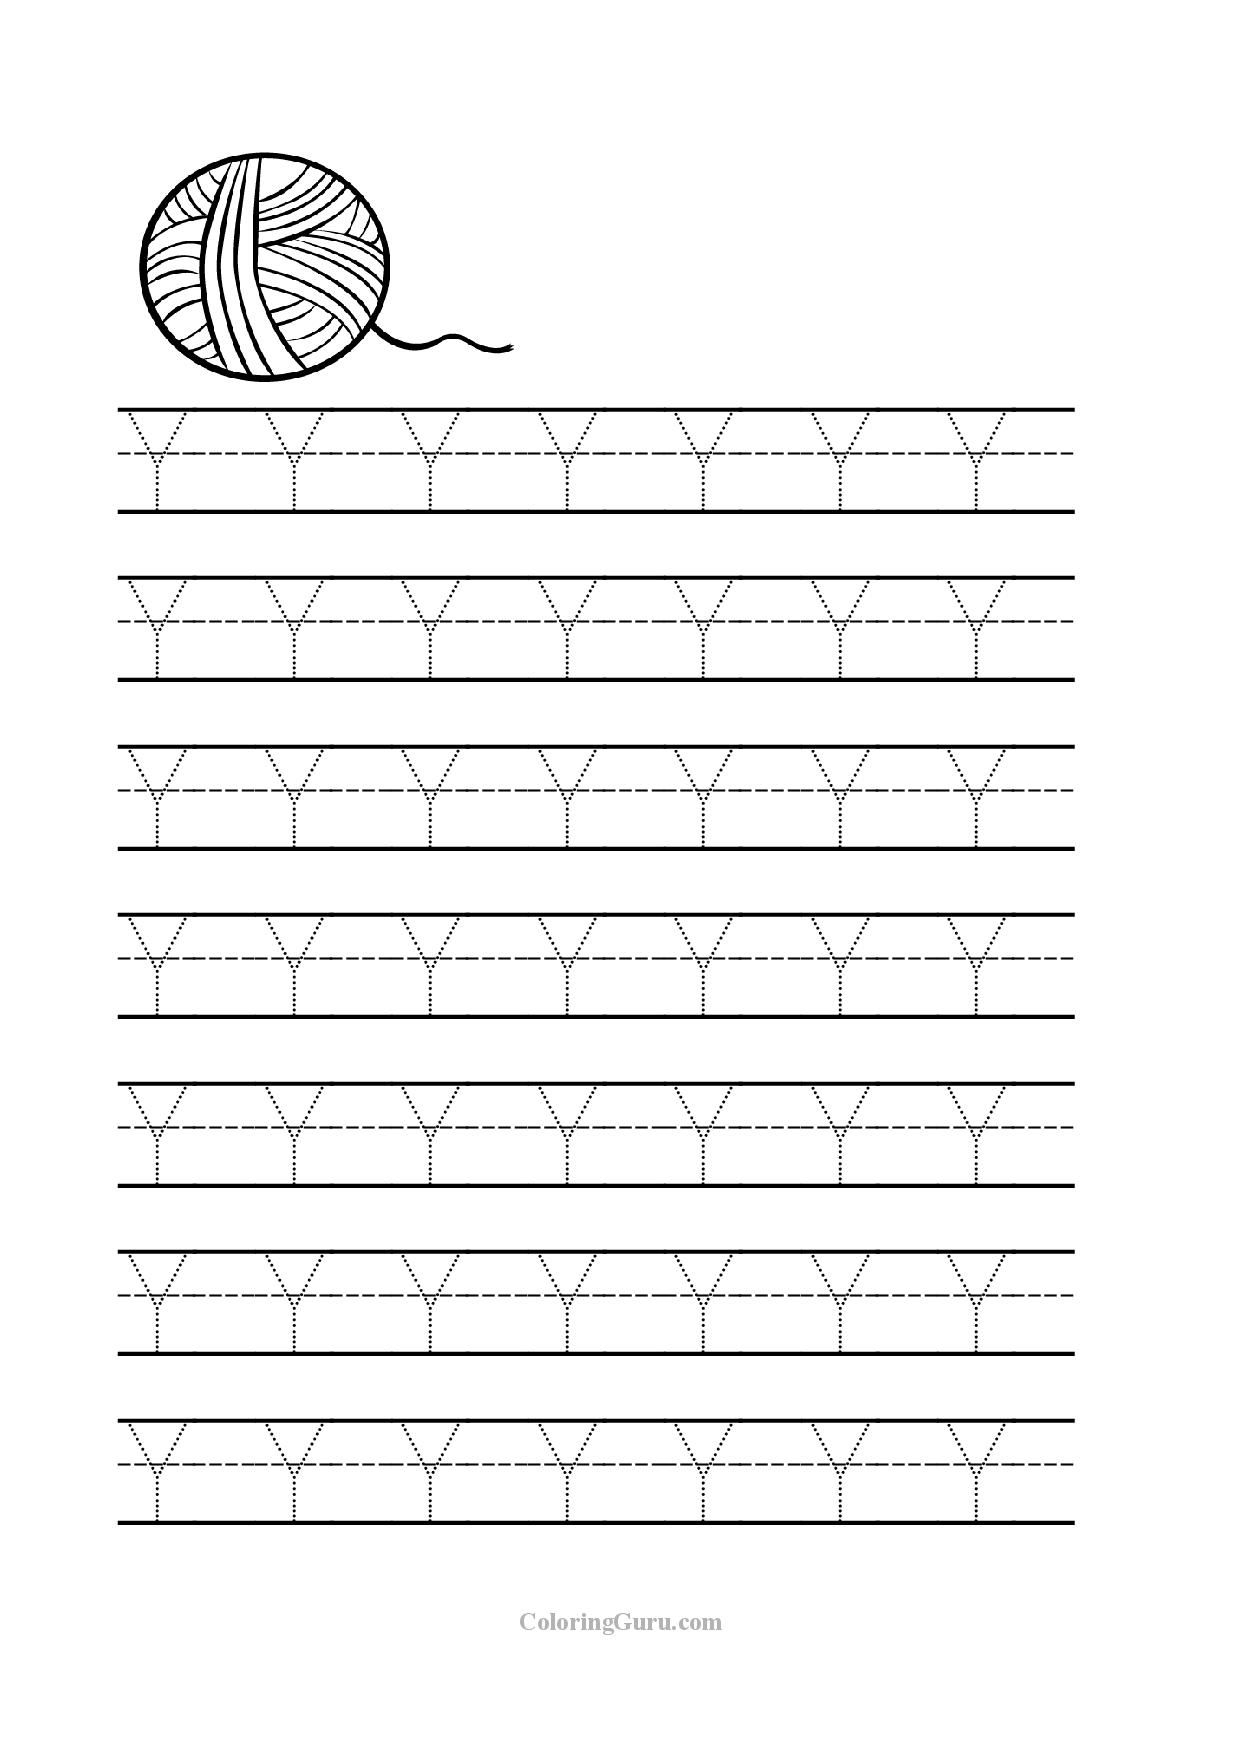 Free Printable Tracing Letter Y Worksheets For Preschool with regard to Letter Y Worksheets Free Printable